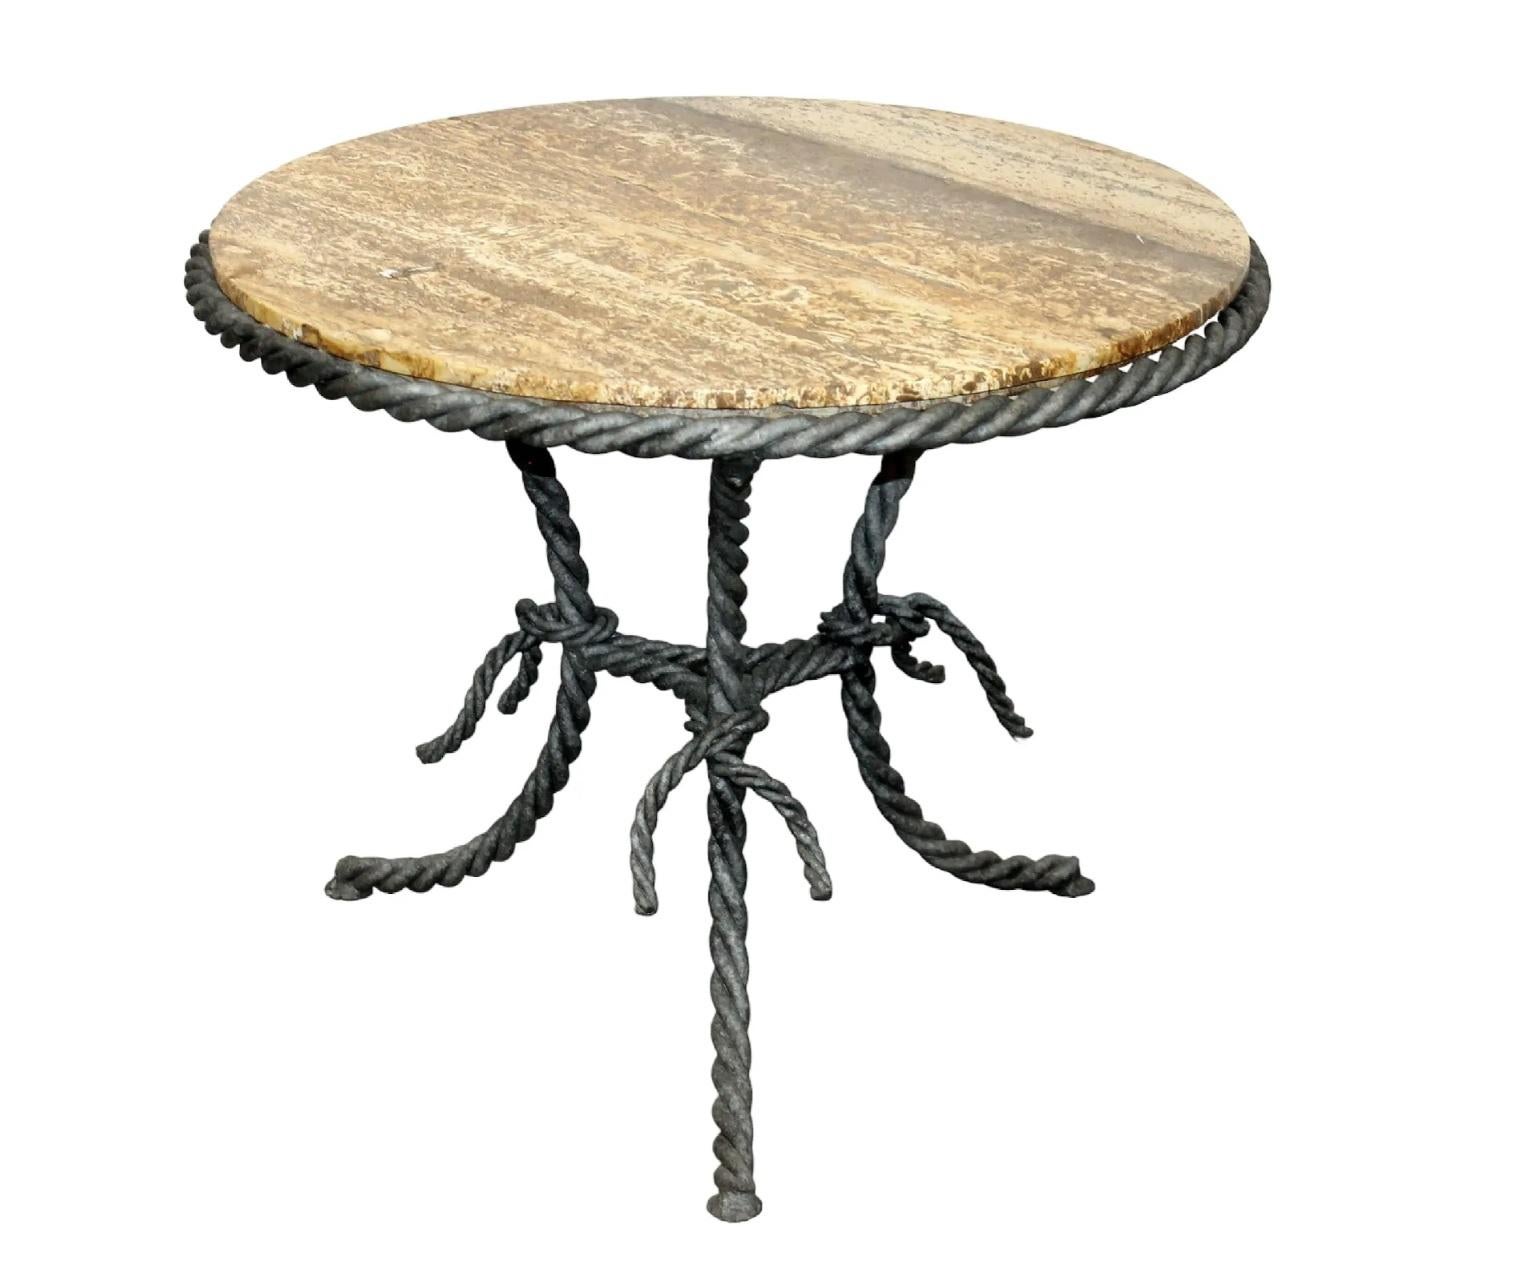 Midcentury iron side table with twisted rope motif base and round travertine top.